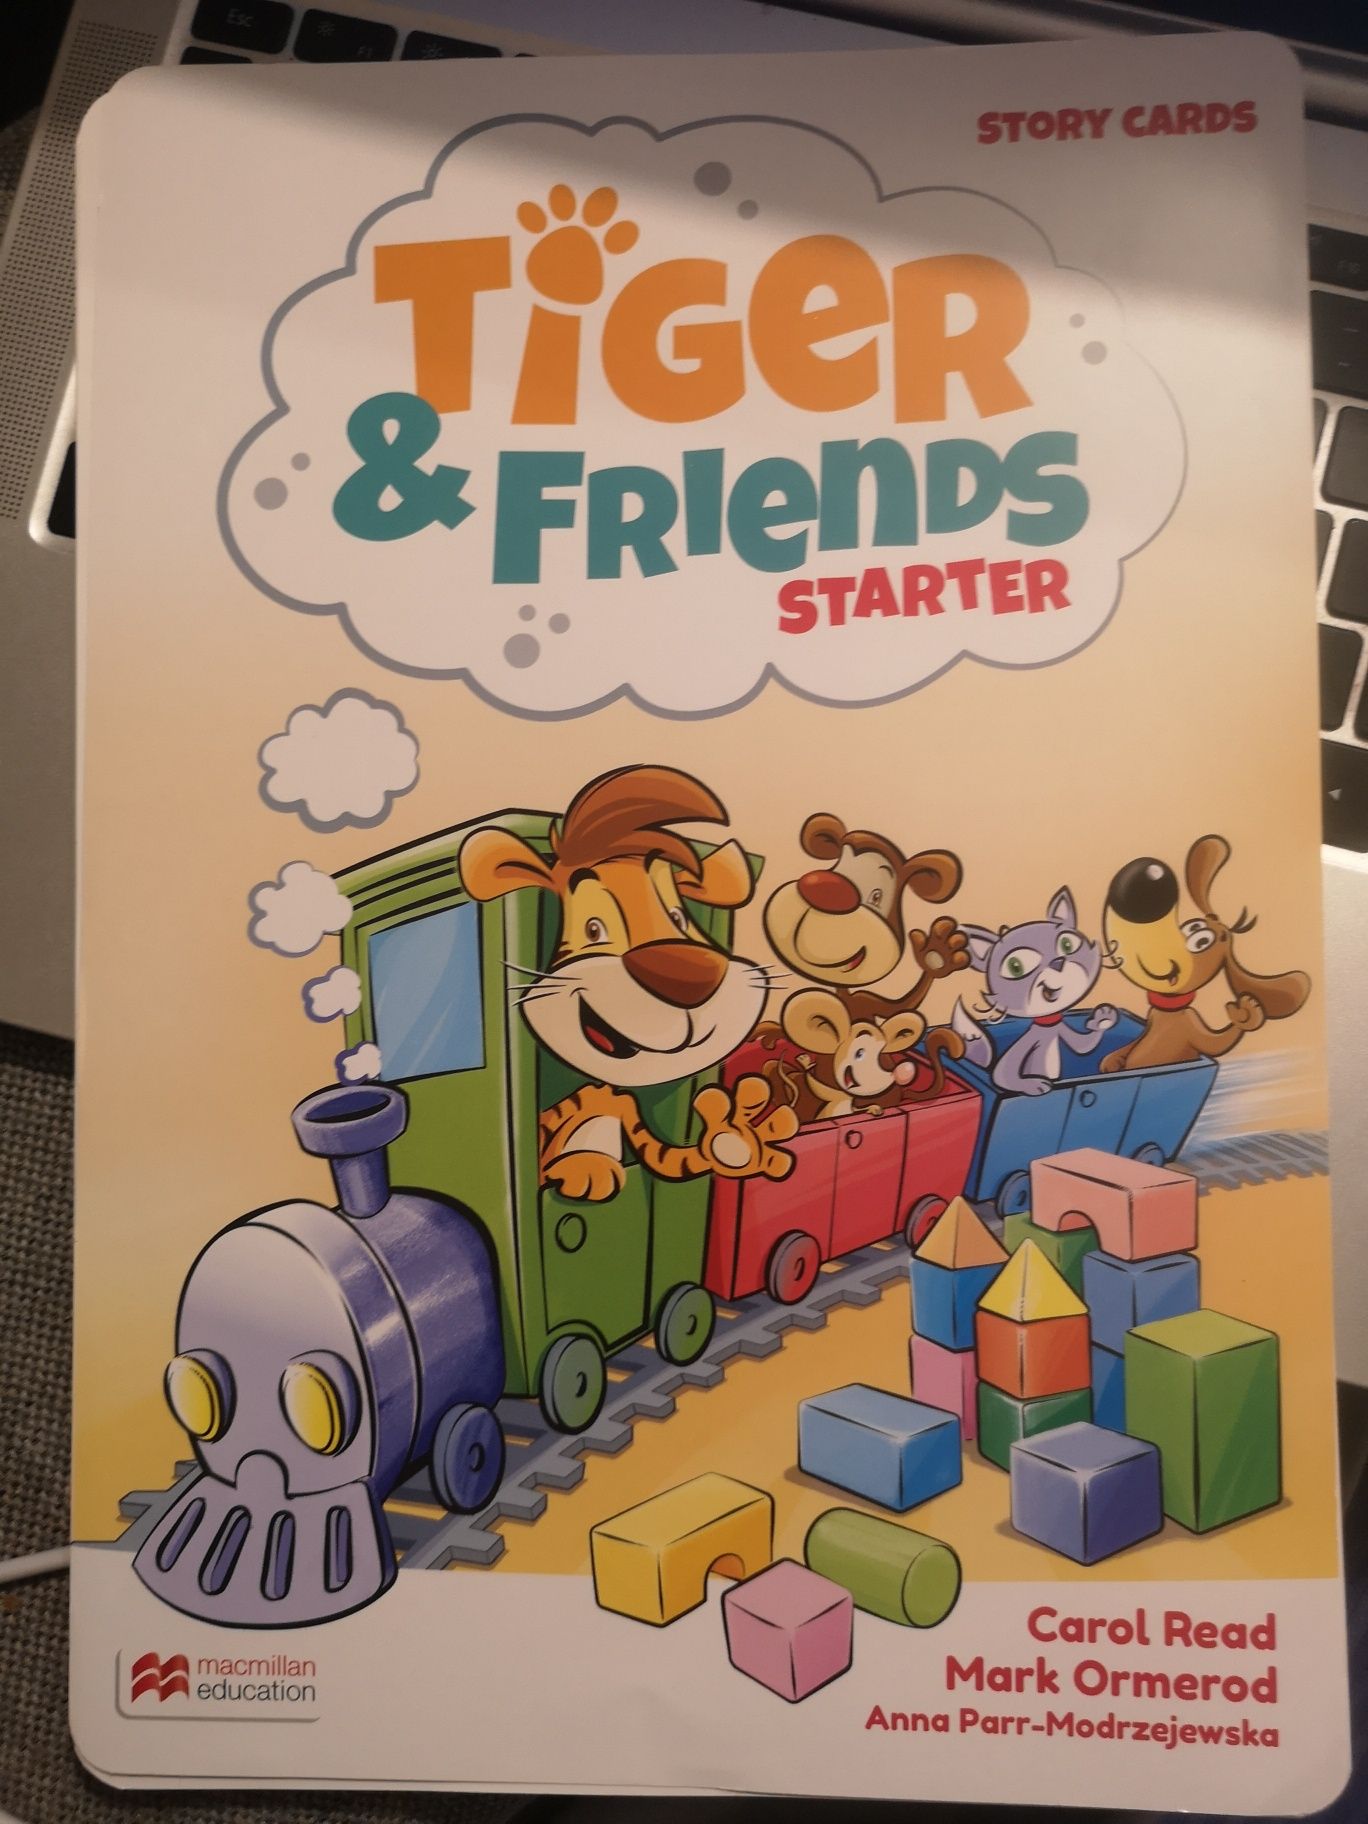 Tiger and friends starter Story cards